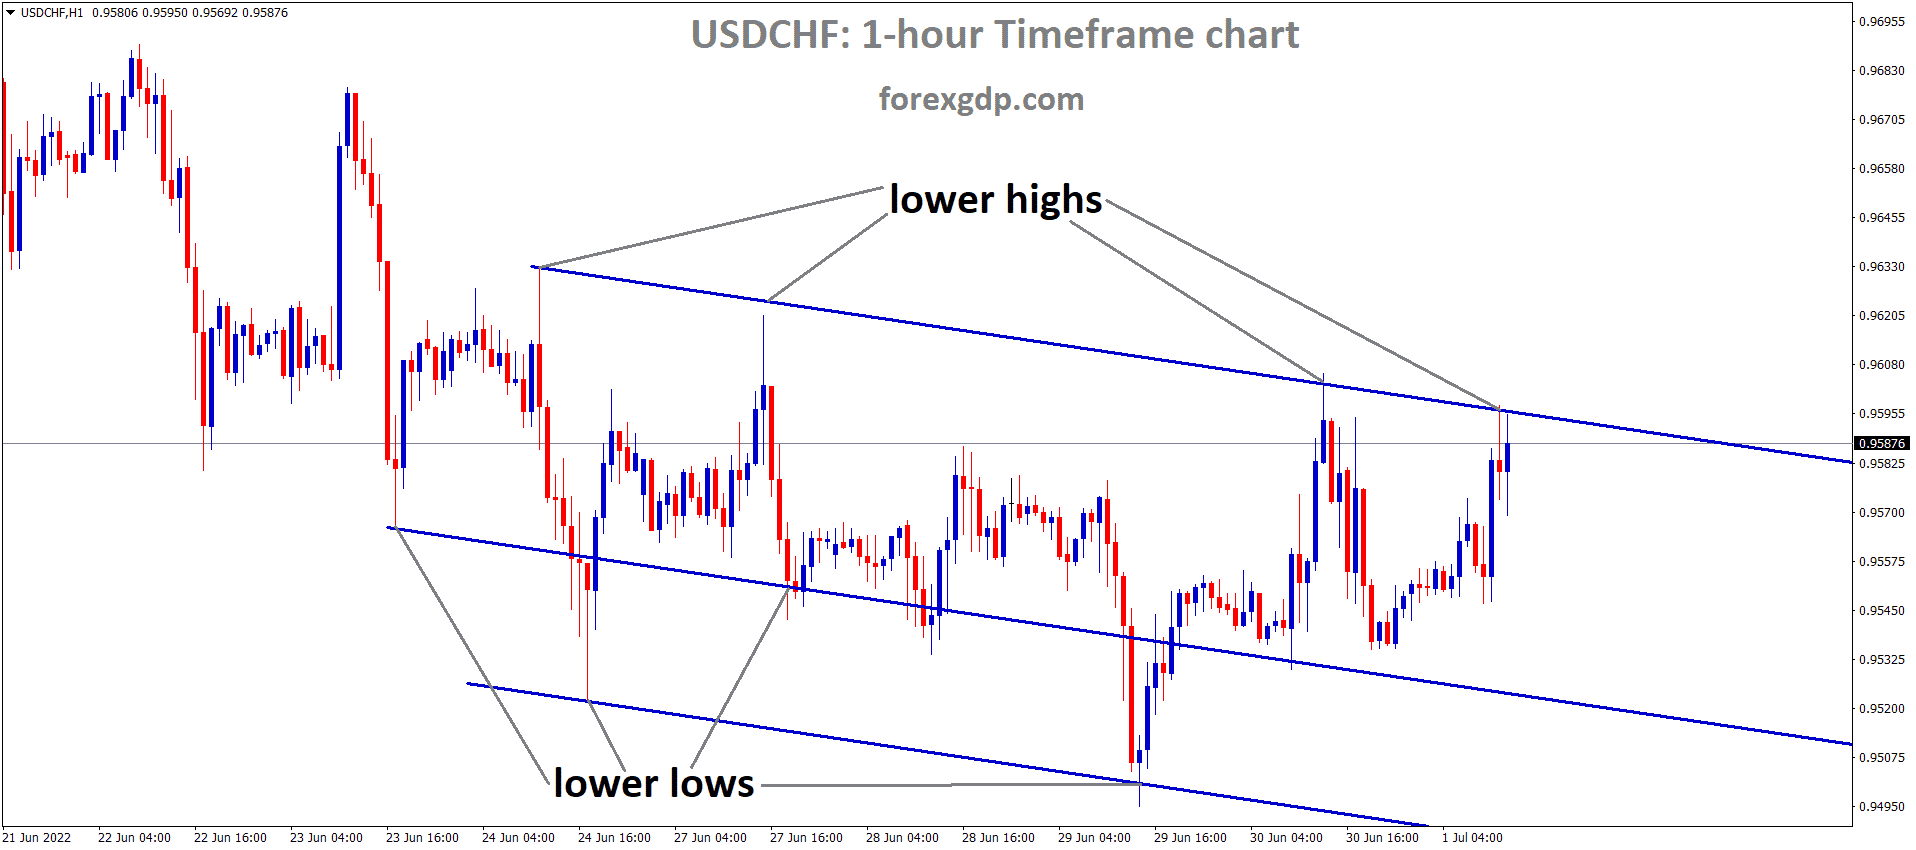 USDCHF is moving in the Descending channel and the Market has reached the Lower high area of the Channel.